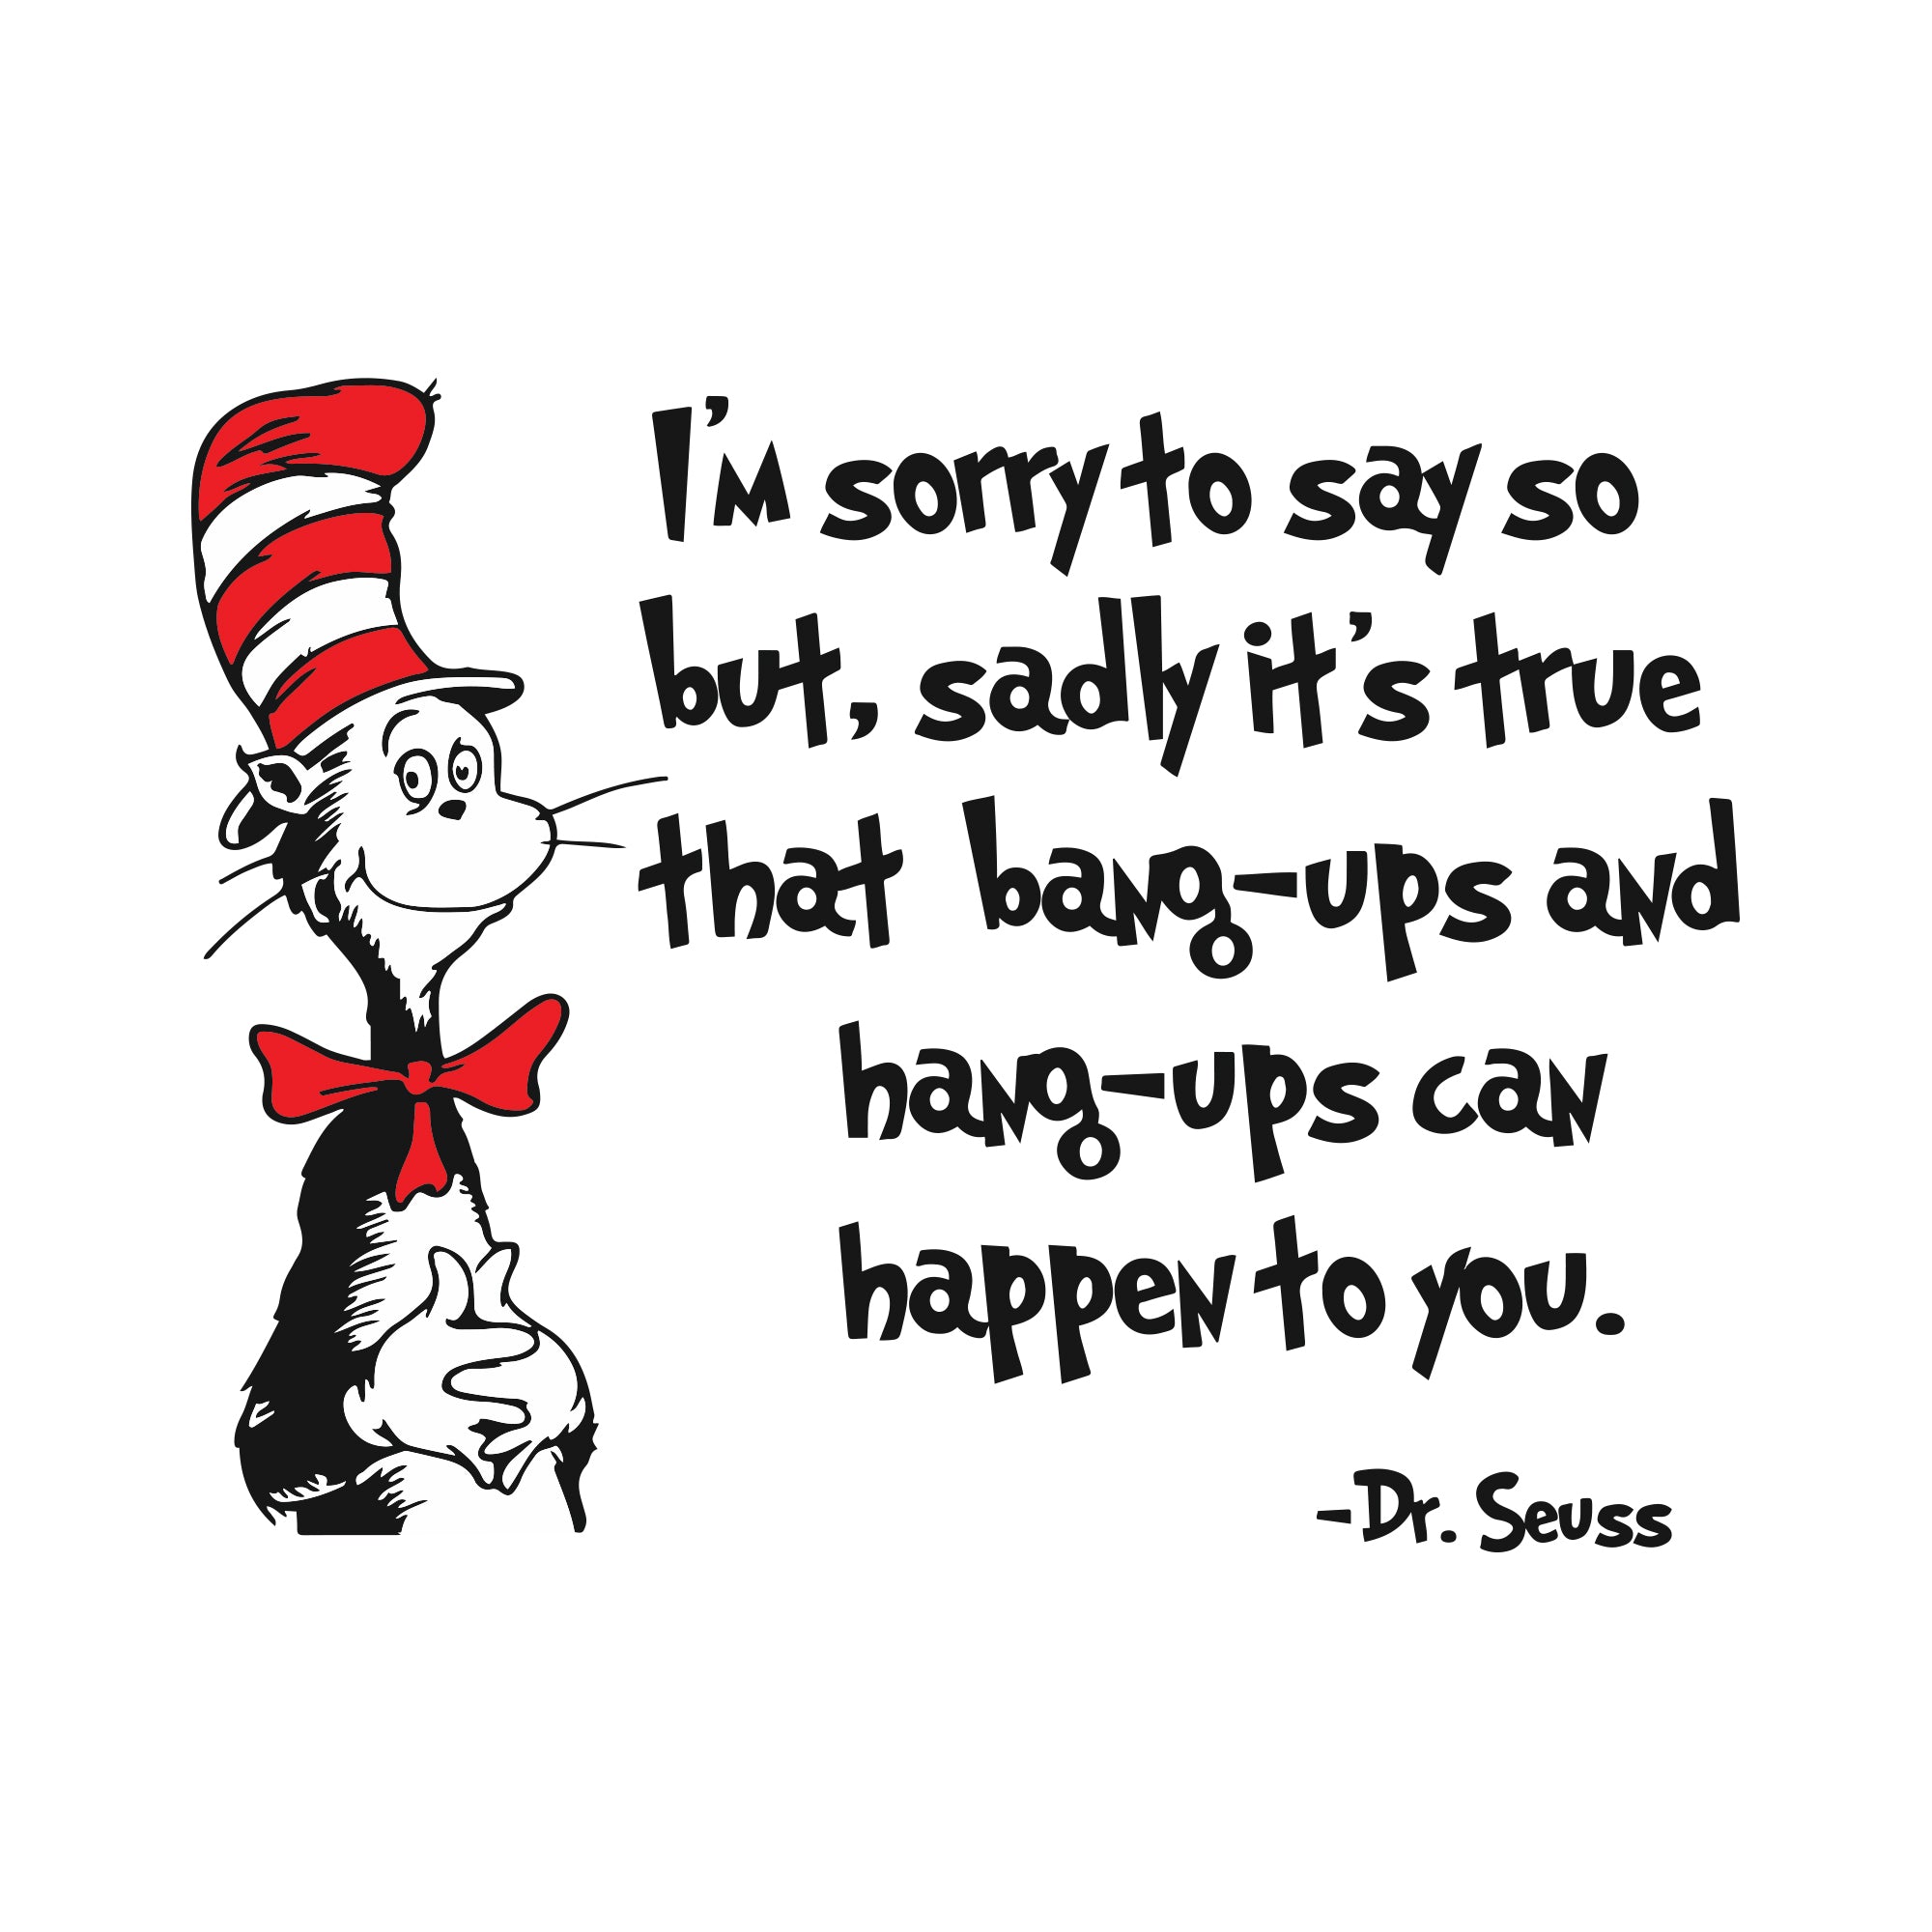 I am sorry to say so but, sadly it is true that bang-ups and hang-ups can happen to you dr seuss svg, dr seuss svg, dr svg, png, dxf, eps file